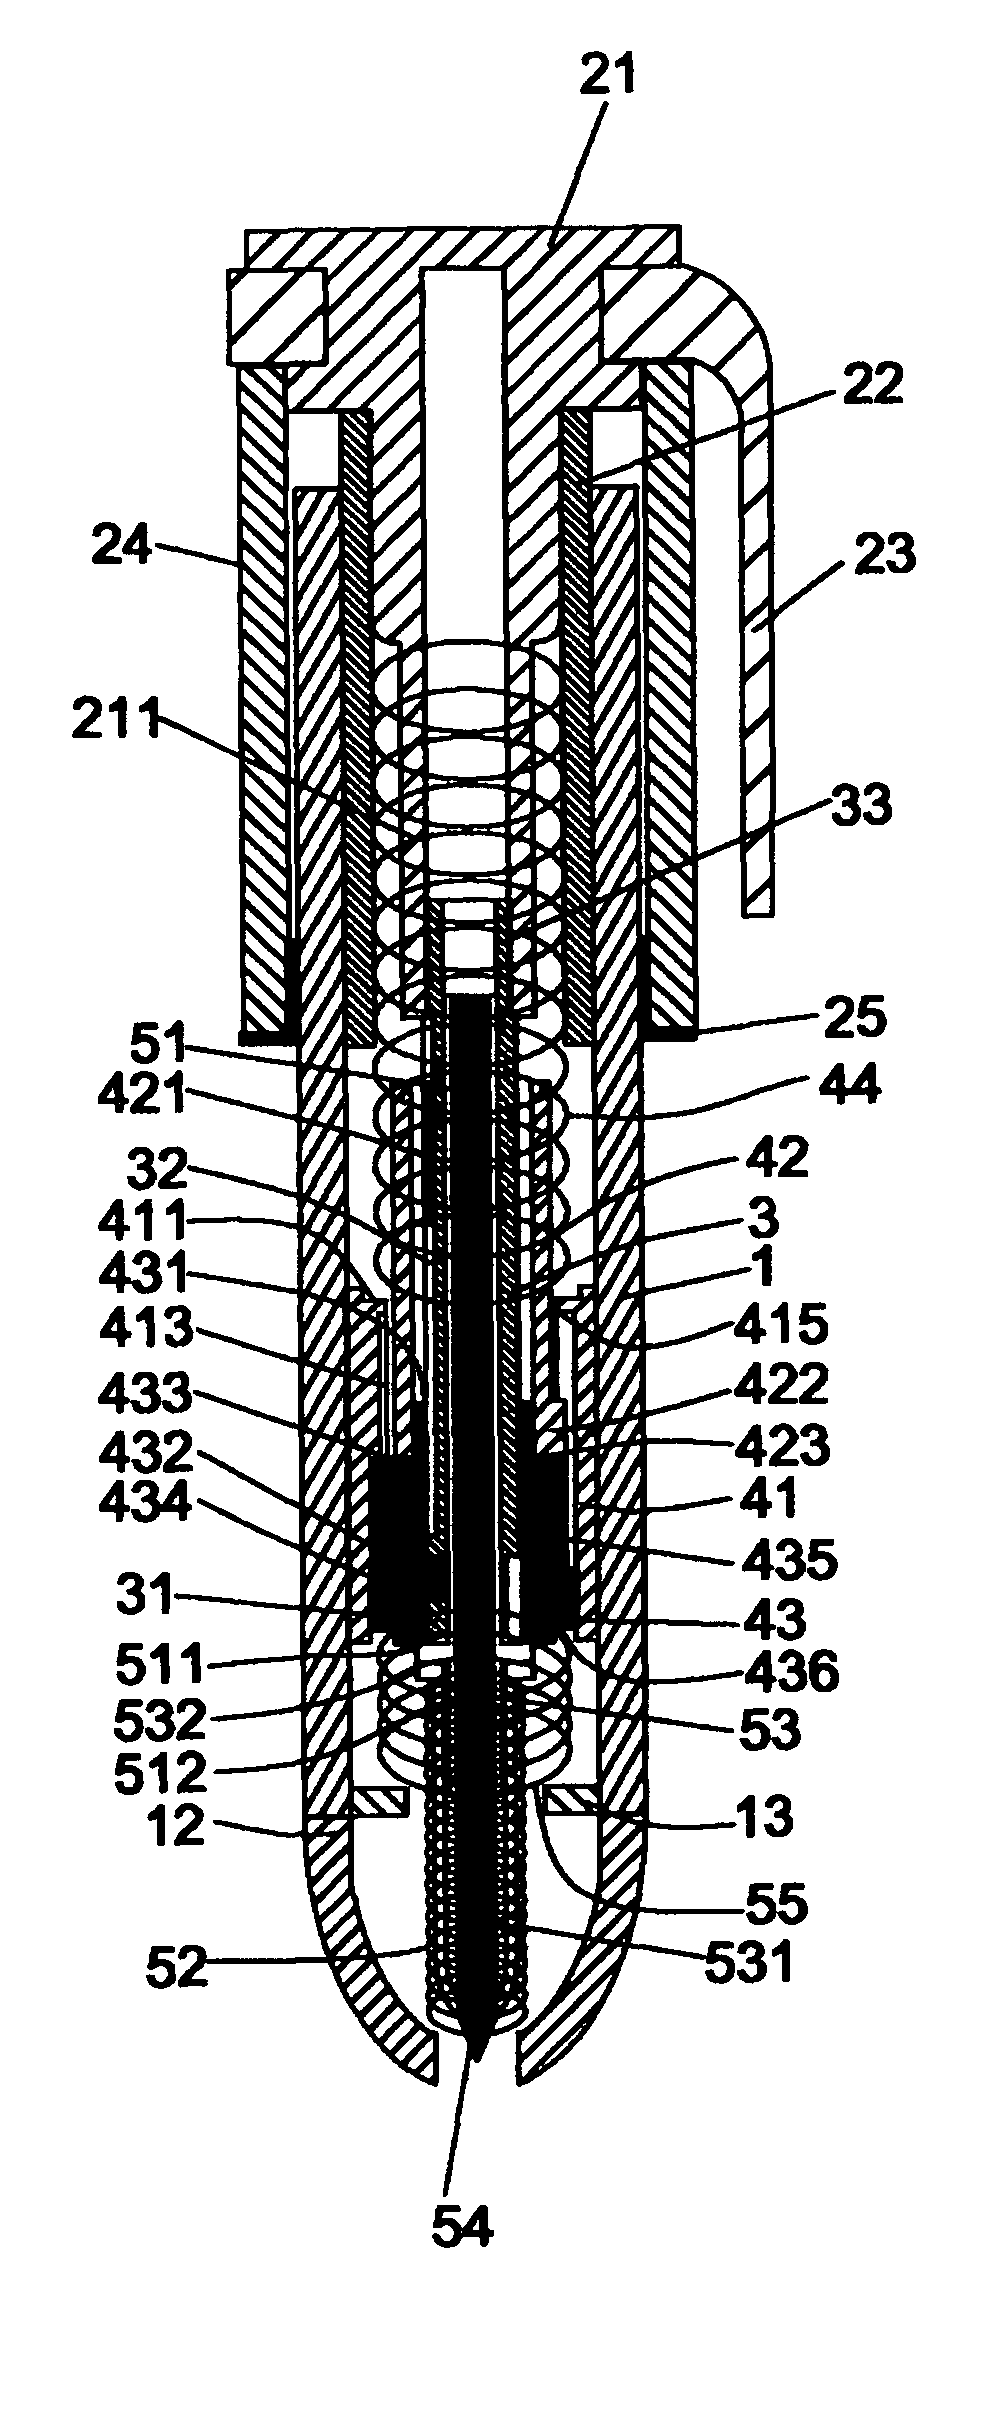 Retractable pen with retraction-linking device for extending pen-body